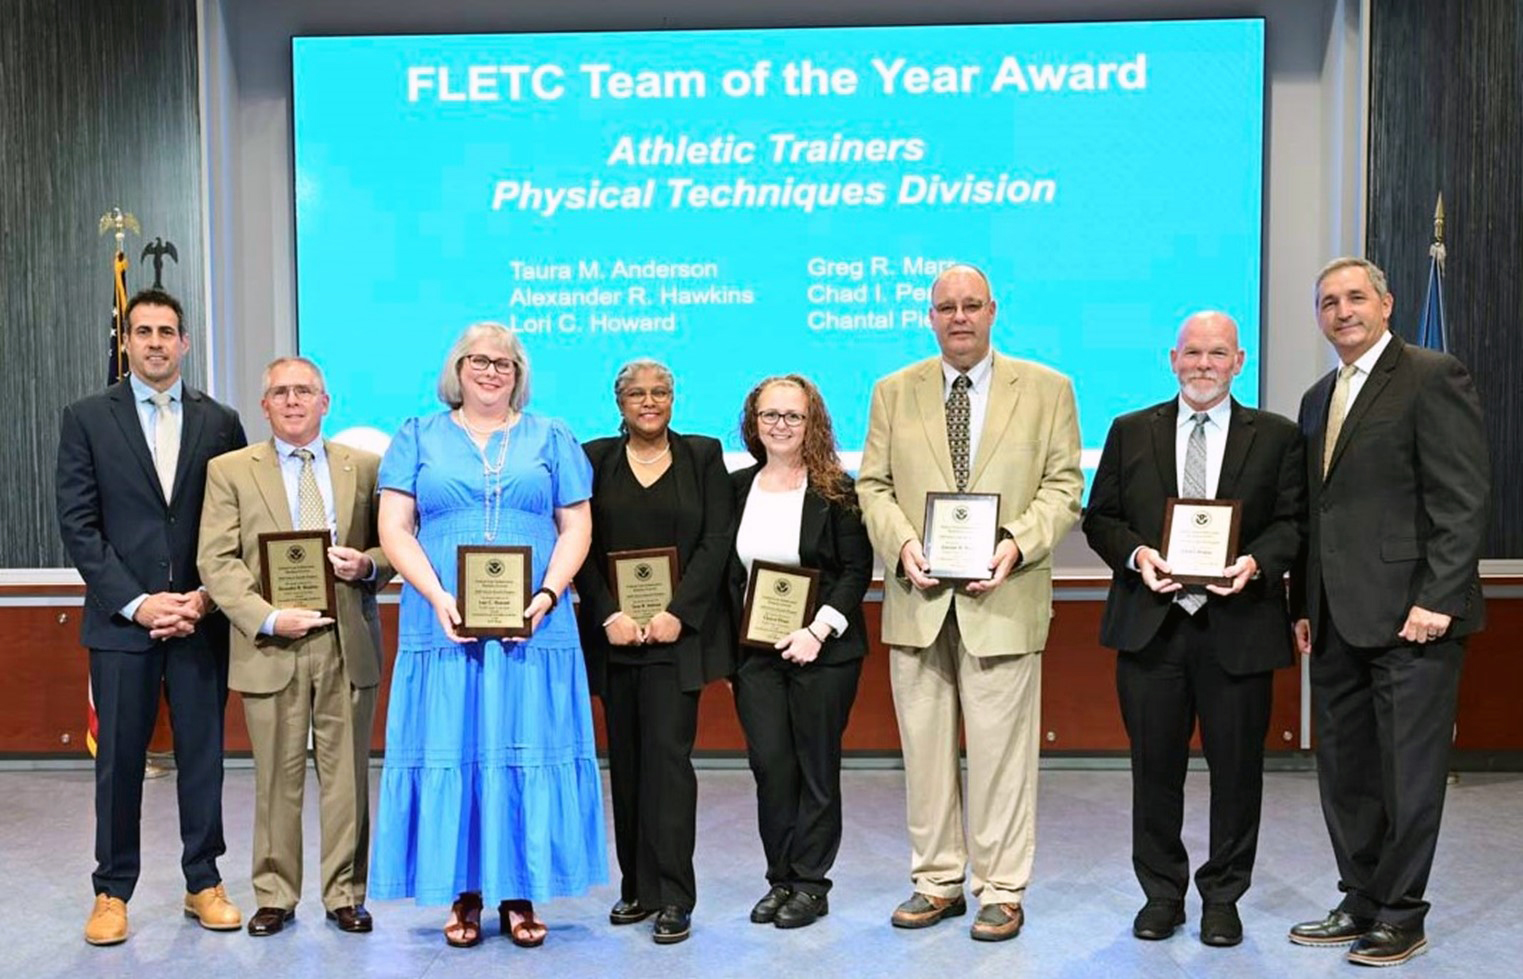 Federal Law Enforcement Training Centers (FLETC), 2023 Team of the Year Award awarded to Athletic Trainers from the Physical Techniques Division, Core Training Operations Directorate, presented by FLETC Director Benjamine C. Huffman and FLETC Deputy Director Kai J. Munshi at FLETC Annual Awards Ceremony, June 12, 2024, Glynco GA. (Photo by David Tucker, OPA)